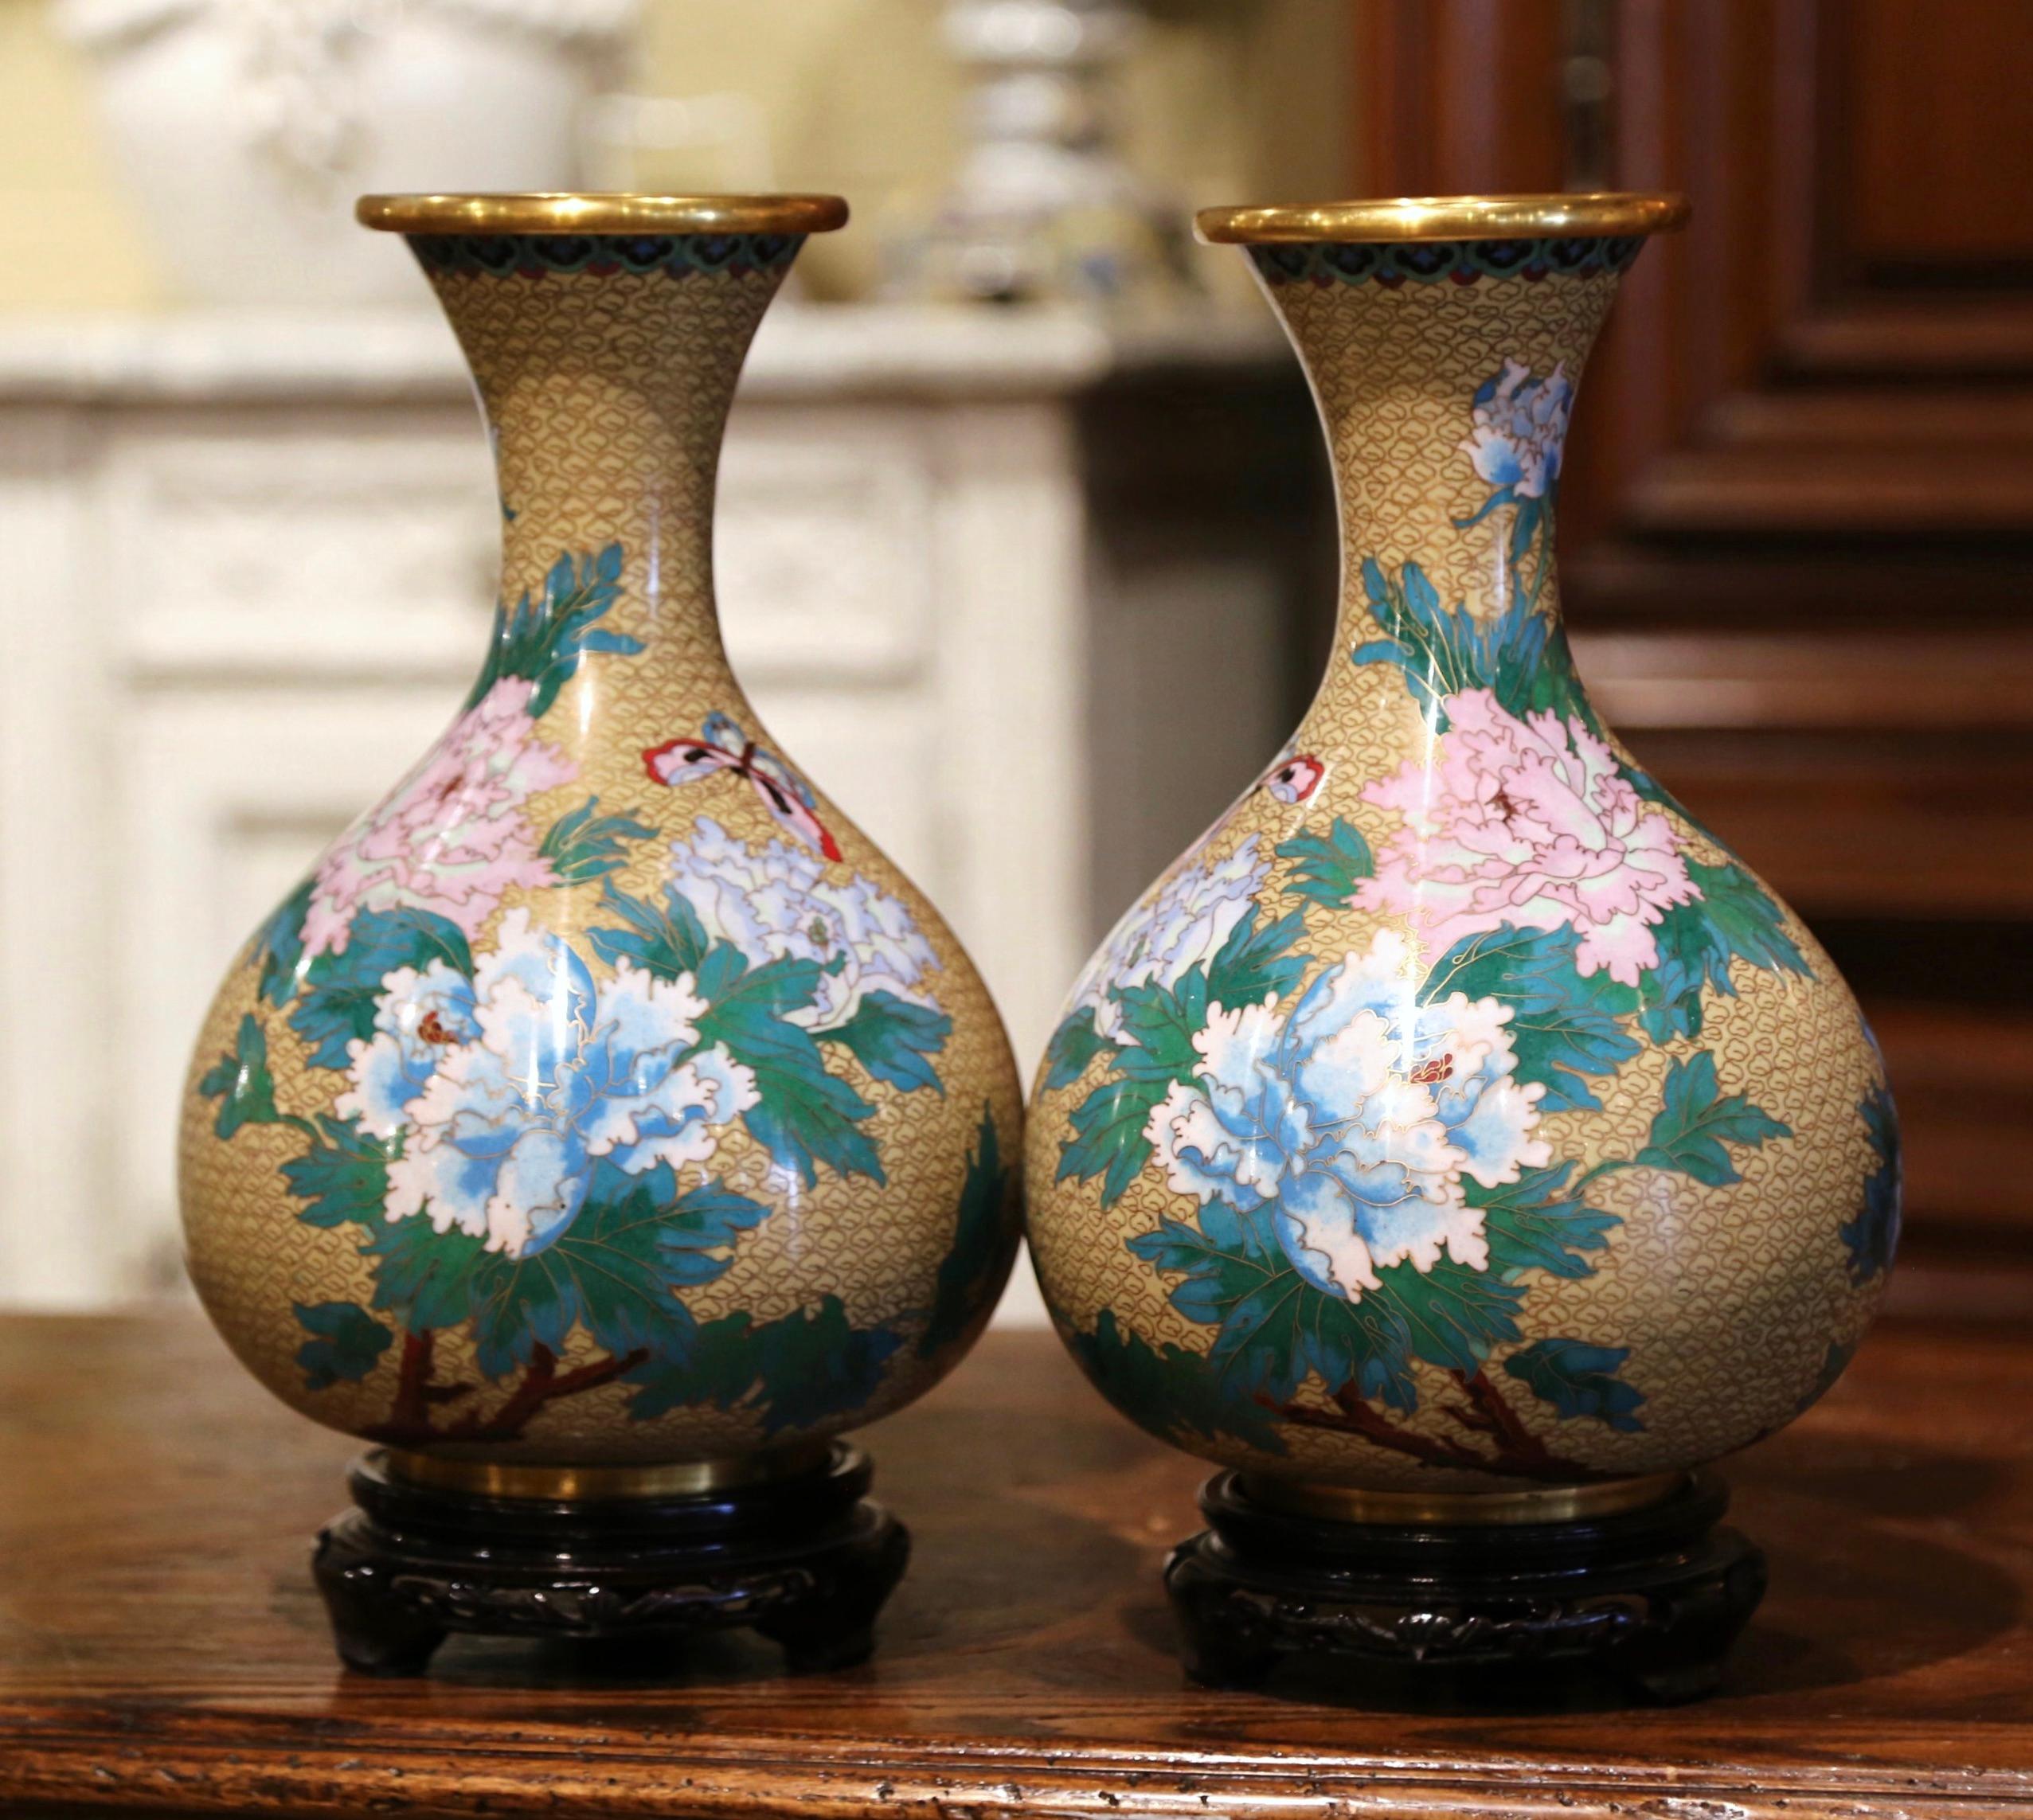 Decorate a mantel with this colorful pair of baluster vases; created in China circa 1980, each vase sits on a carved ebonized wood stand and features floral and butterfly motifs in the cloisonné technique (decorative work in which enamel, glass, or